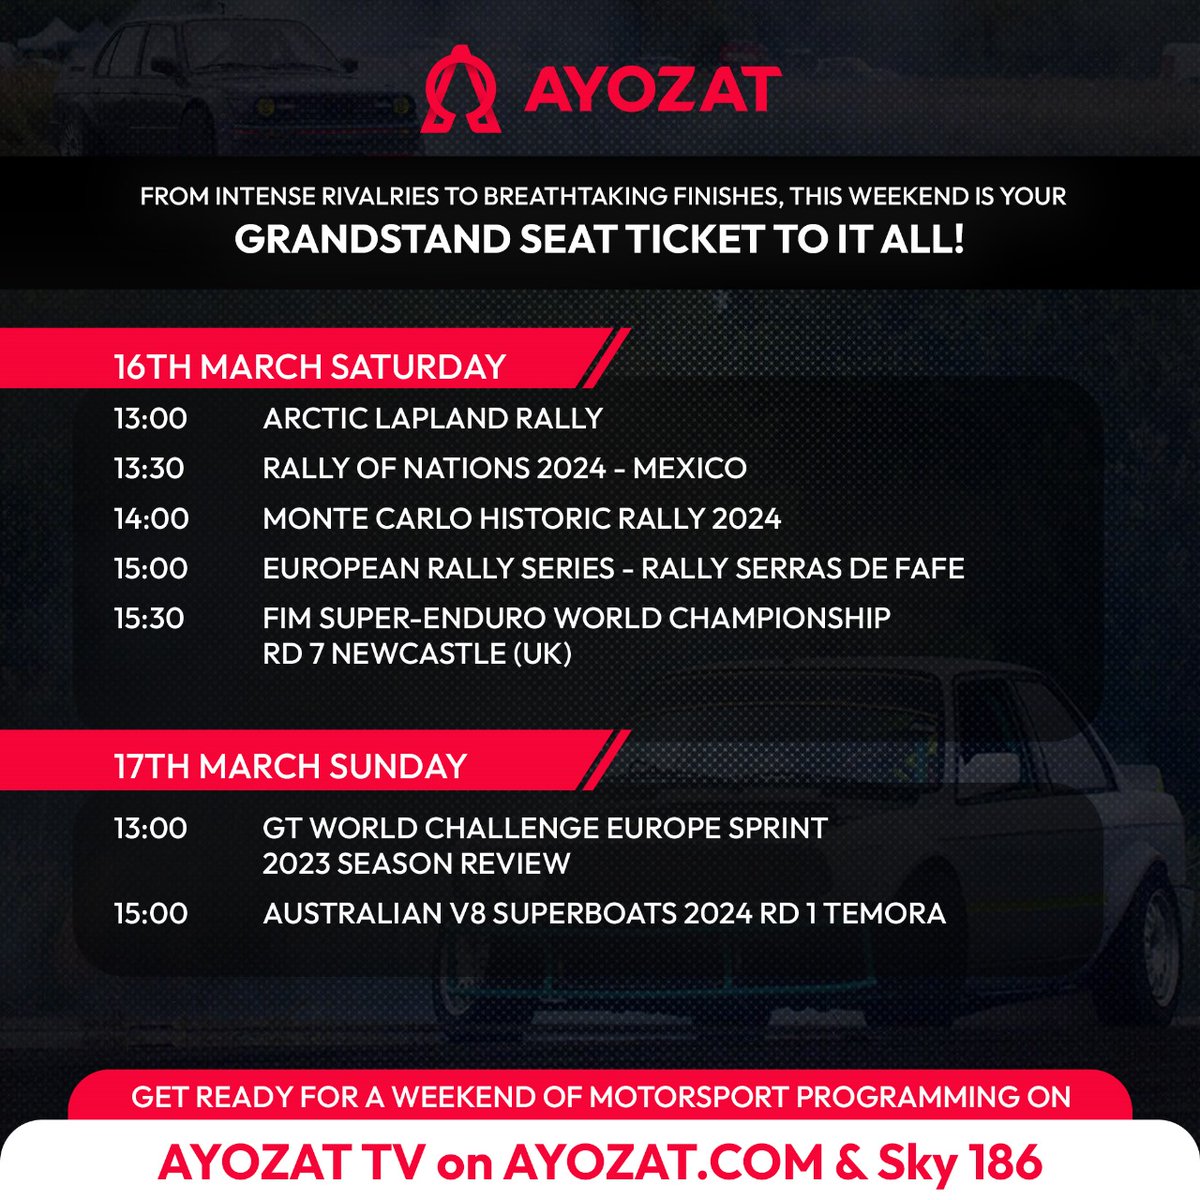 Ready, set, race! Join us this weekend starting at 1 PM on AYOZAT TV at ayozat.com and Sky 186 for roaring engines and nail-biting finishes -  gear up for a weekend of motorsports packed with high-speed thrills!
#motorsport #cars #racing #action #weekendracing